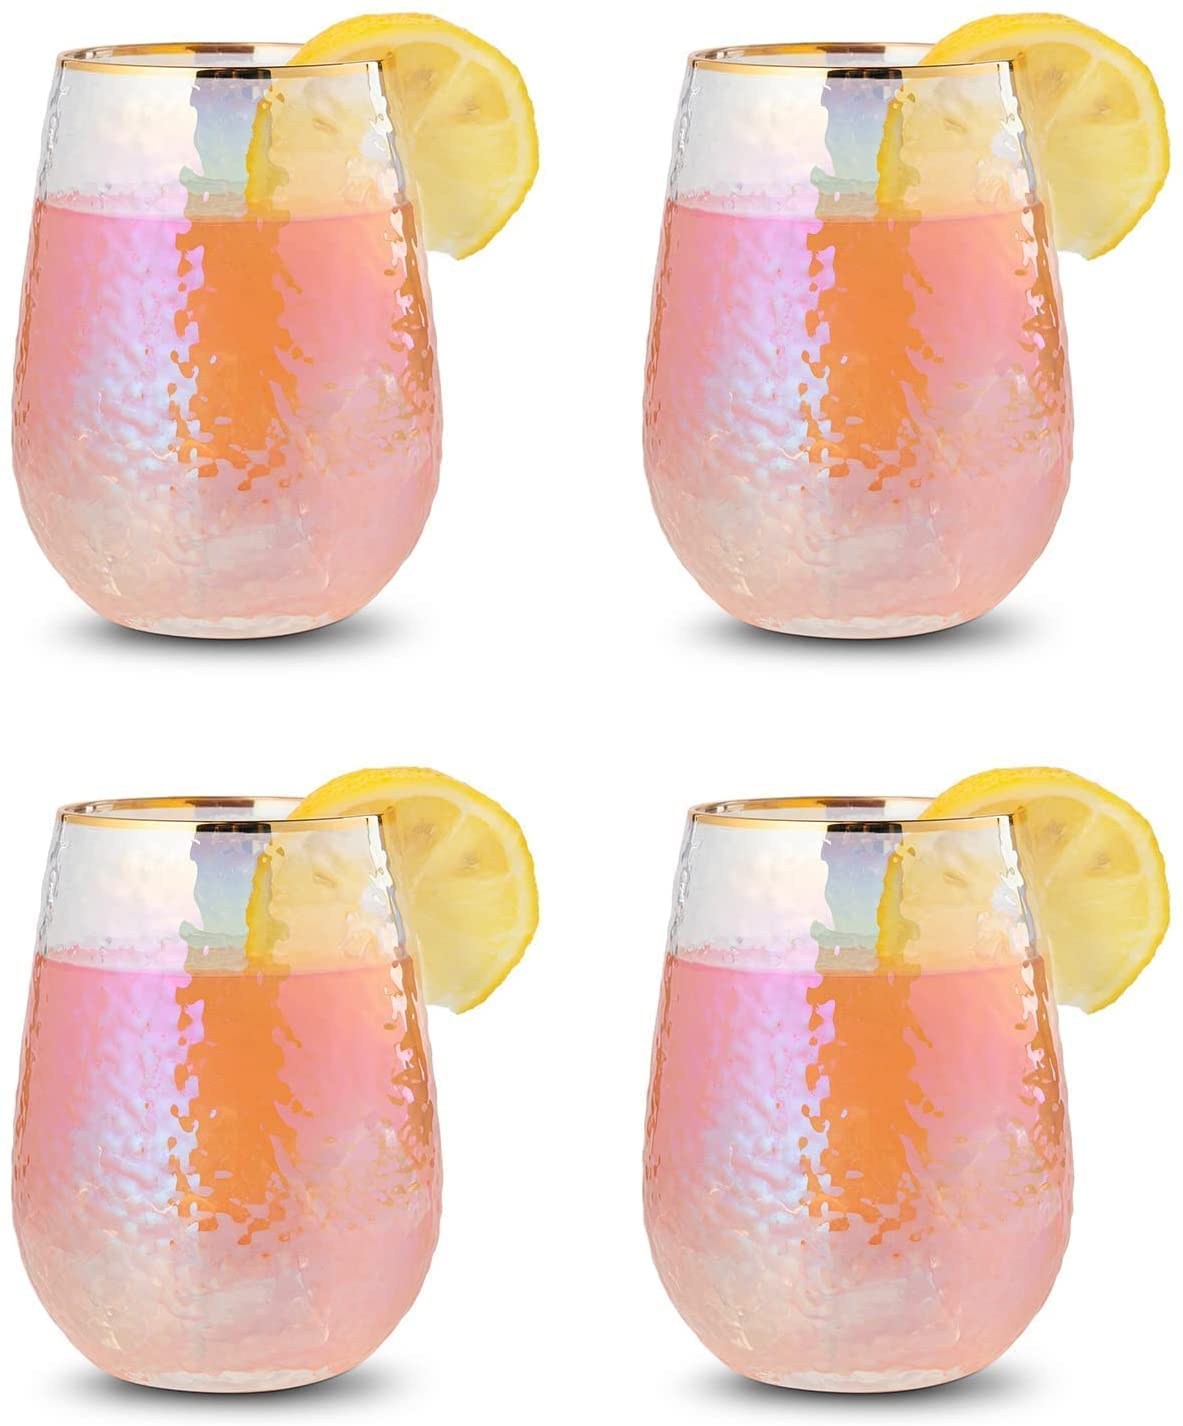 Festive Lustered Iridescent Stemless Wine & Water Glasses - Set of 4-100% Glass 15oz Mouthblown Colorful Glasses - Anniversaries, Birthday Gift, Cocktail Party Radiance - Water, Whiskey, Juice, Gift-4